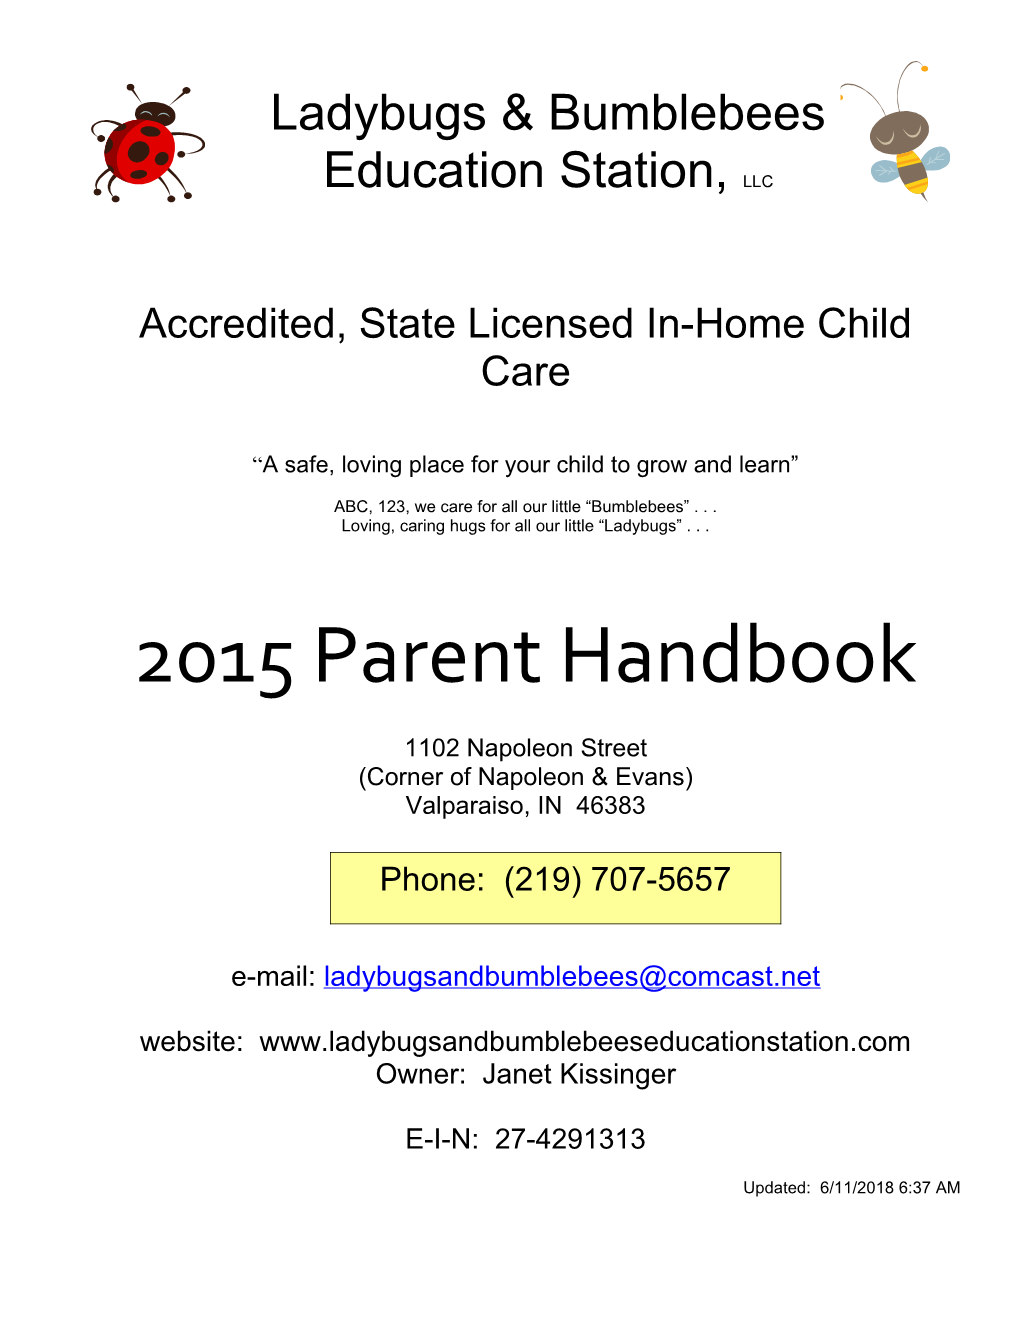 Accredited, State Licensed In-Home Child Care